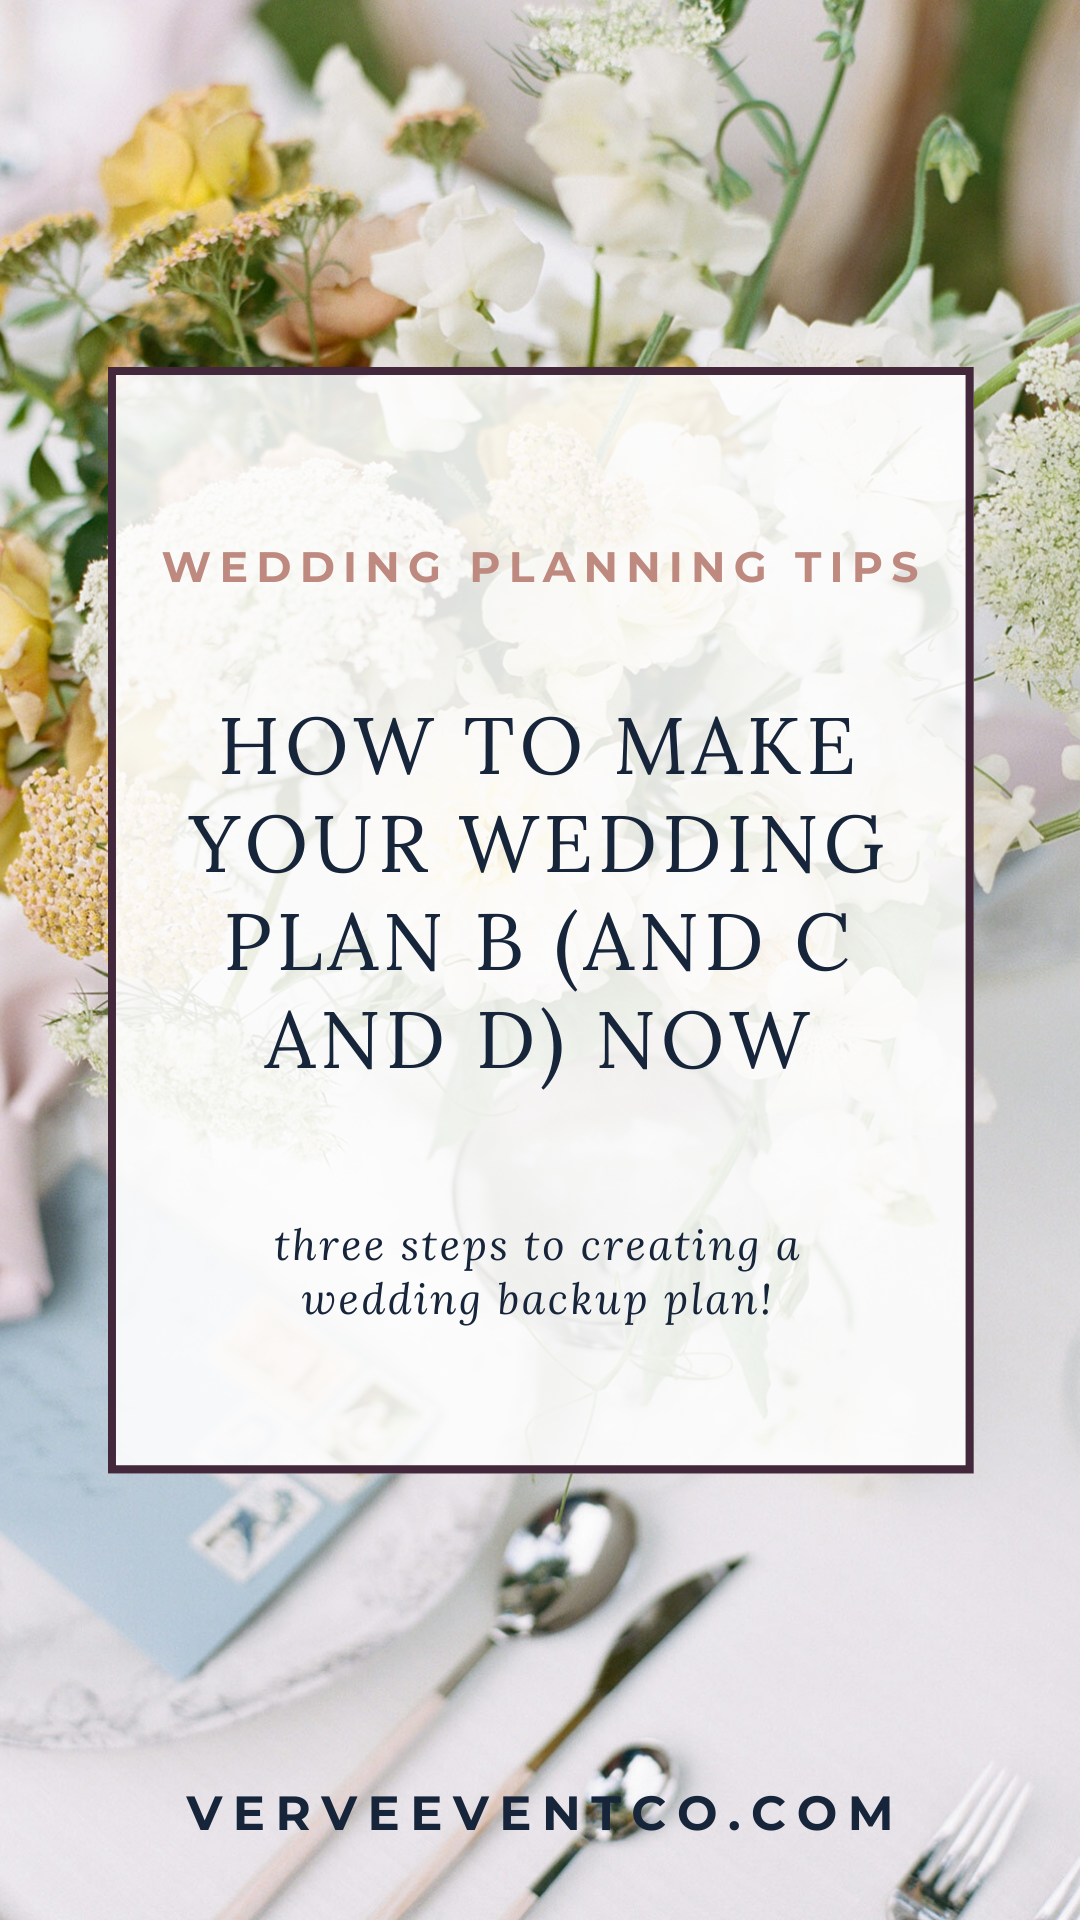 How to Make Your Wedding Plan B NOW!